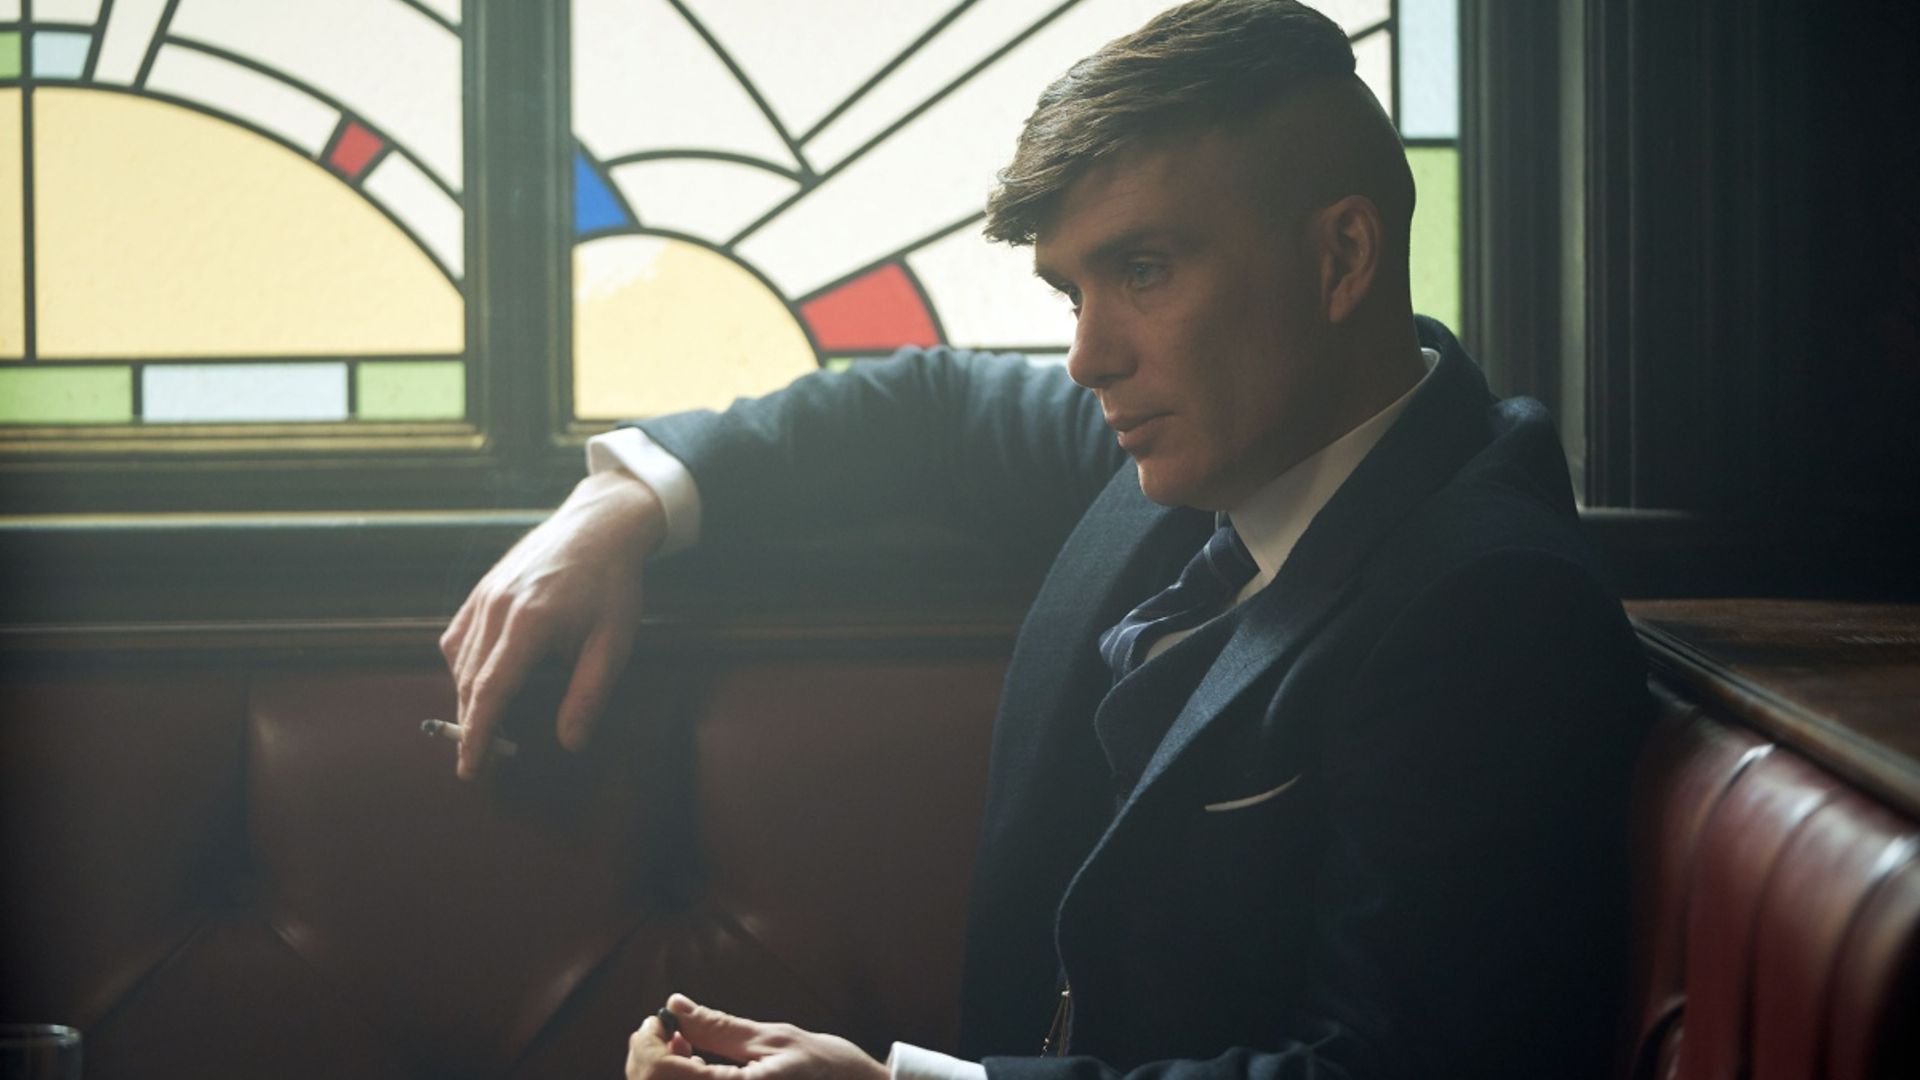 TV preview: Peaky's playing a blinder as city gang back on mean streets